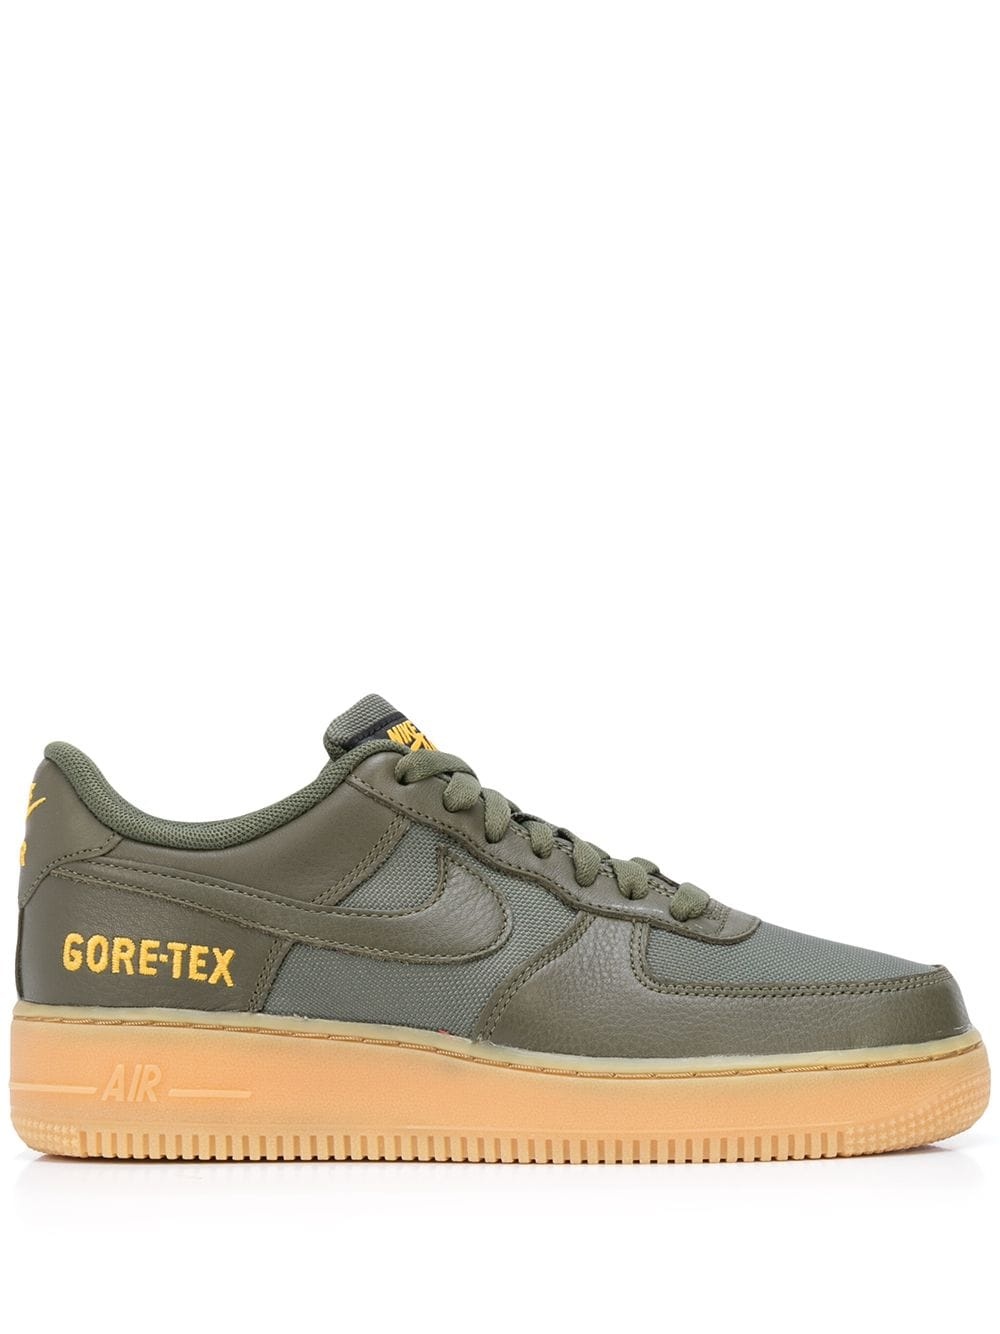 Air Force 1 GORE-TEX "Olive" sneakers - 1